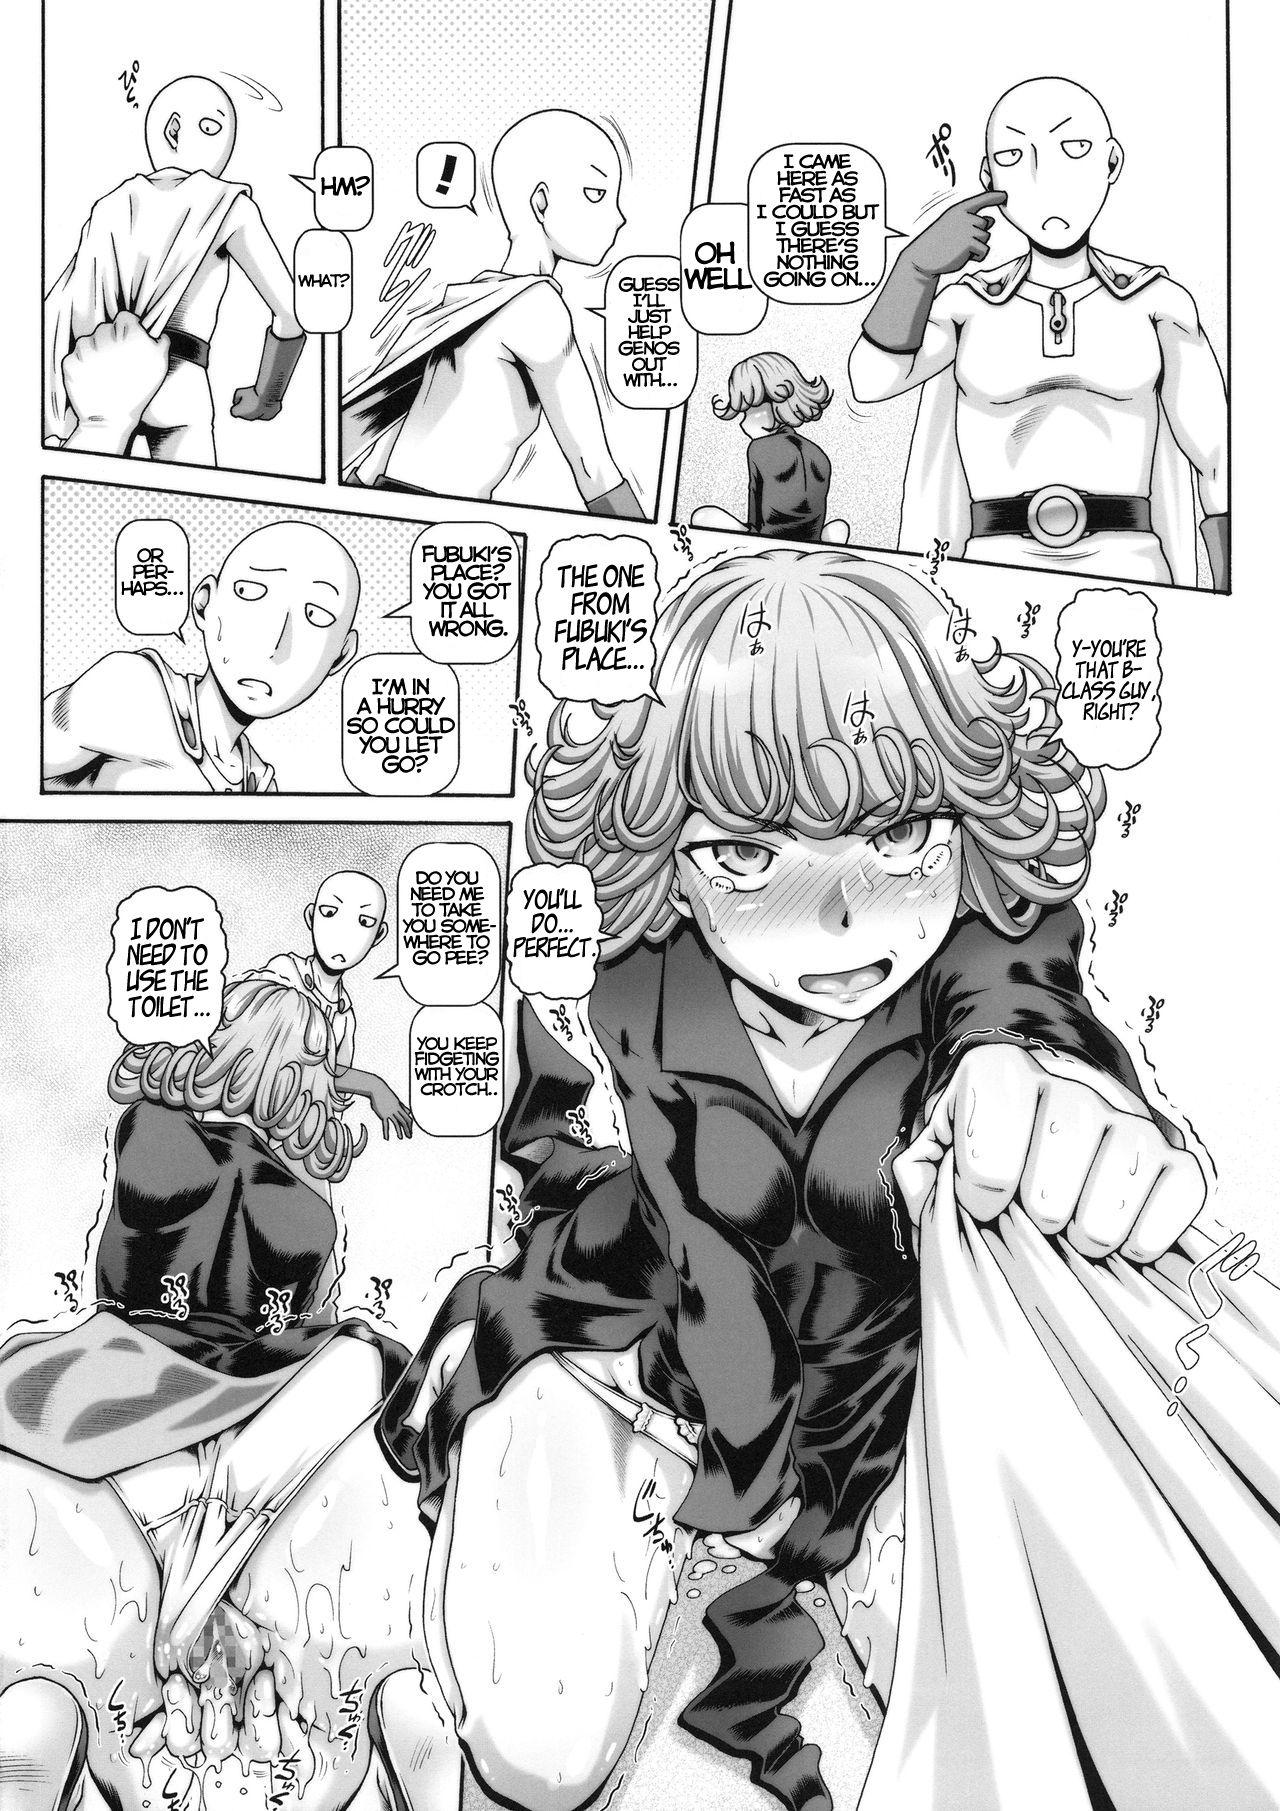 Licking Pussy EMPIRE HARD CORE 2019 SUMMER - One punch man Ass Fuck - Page 5